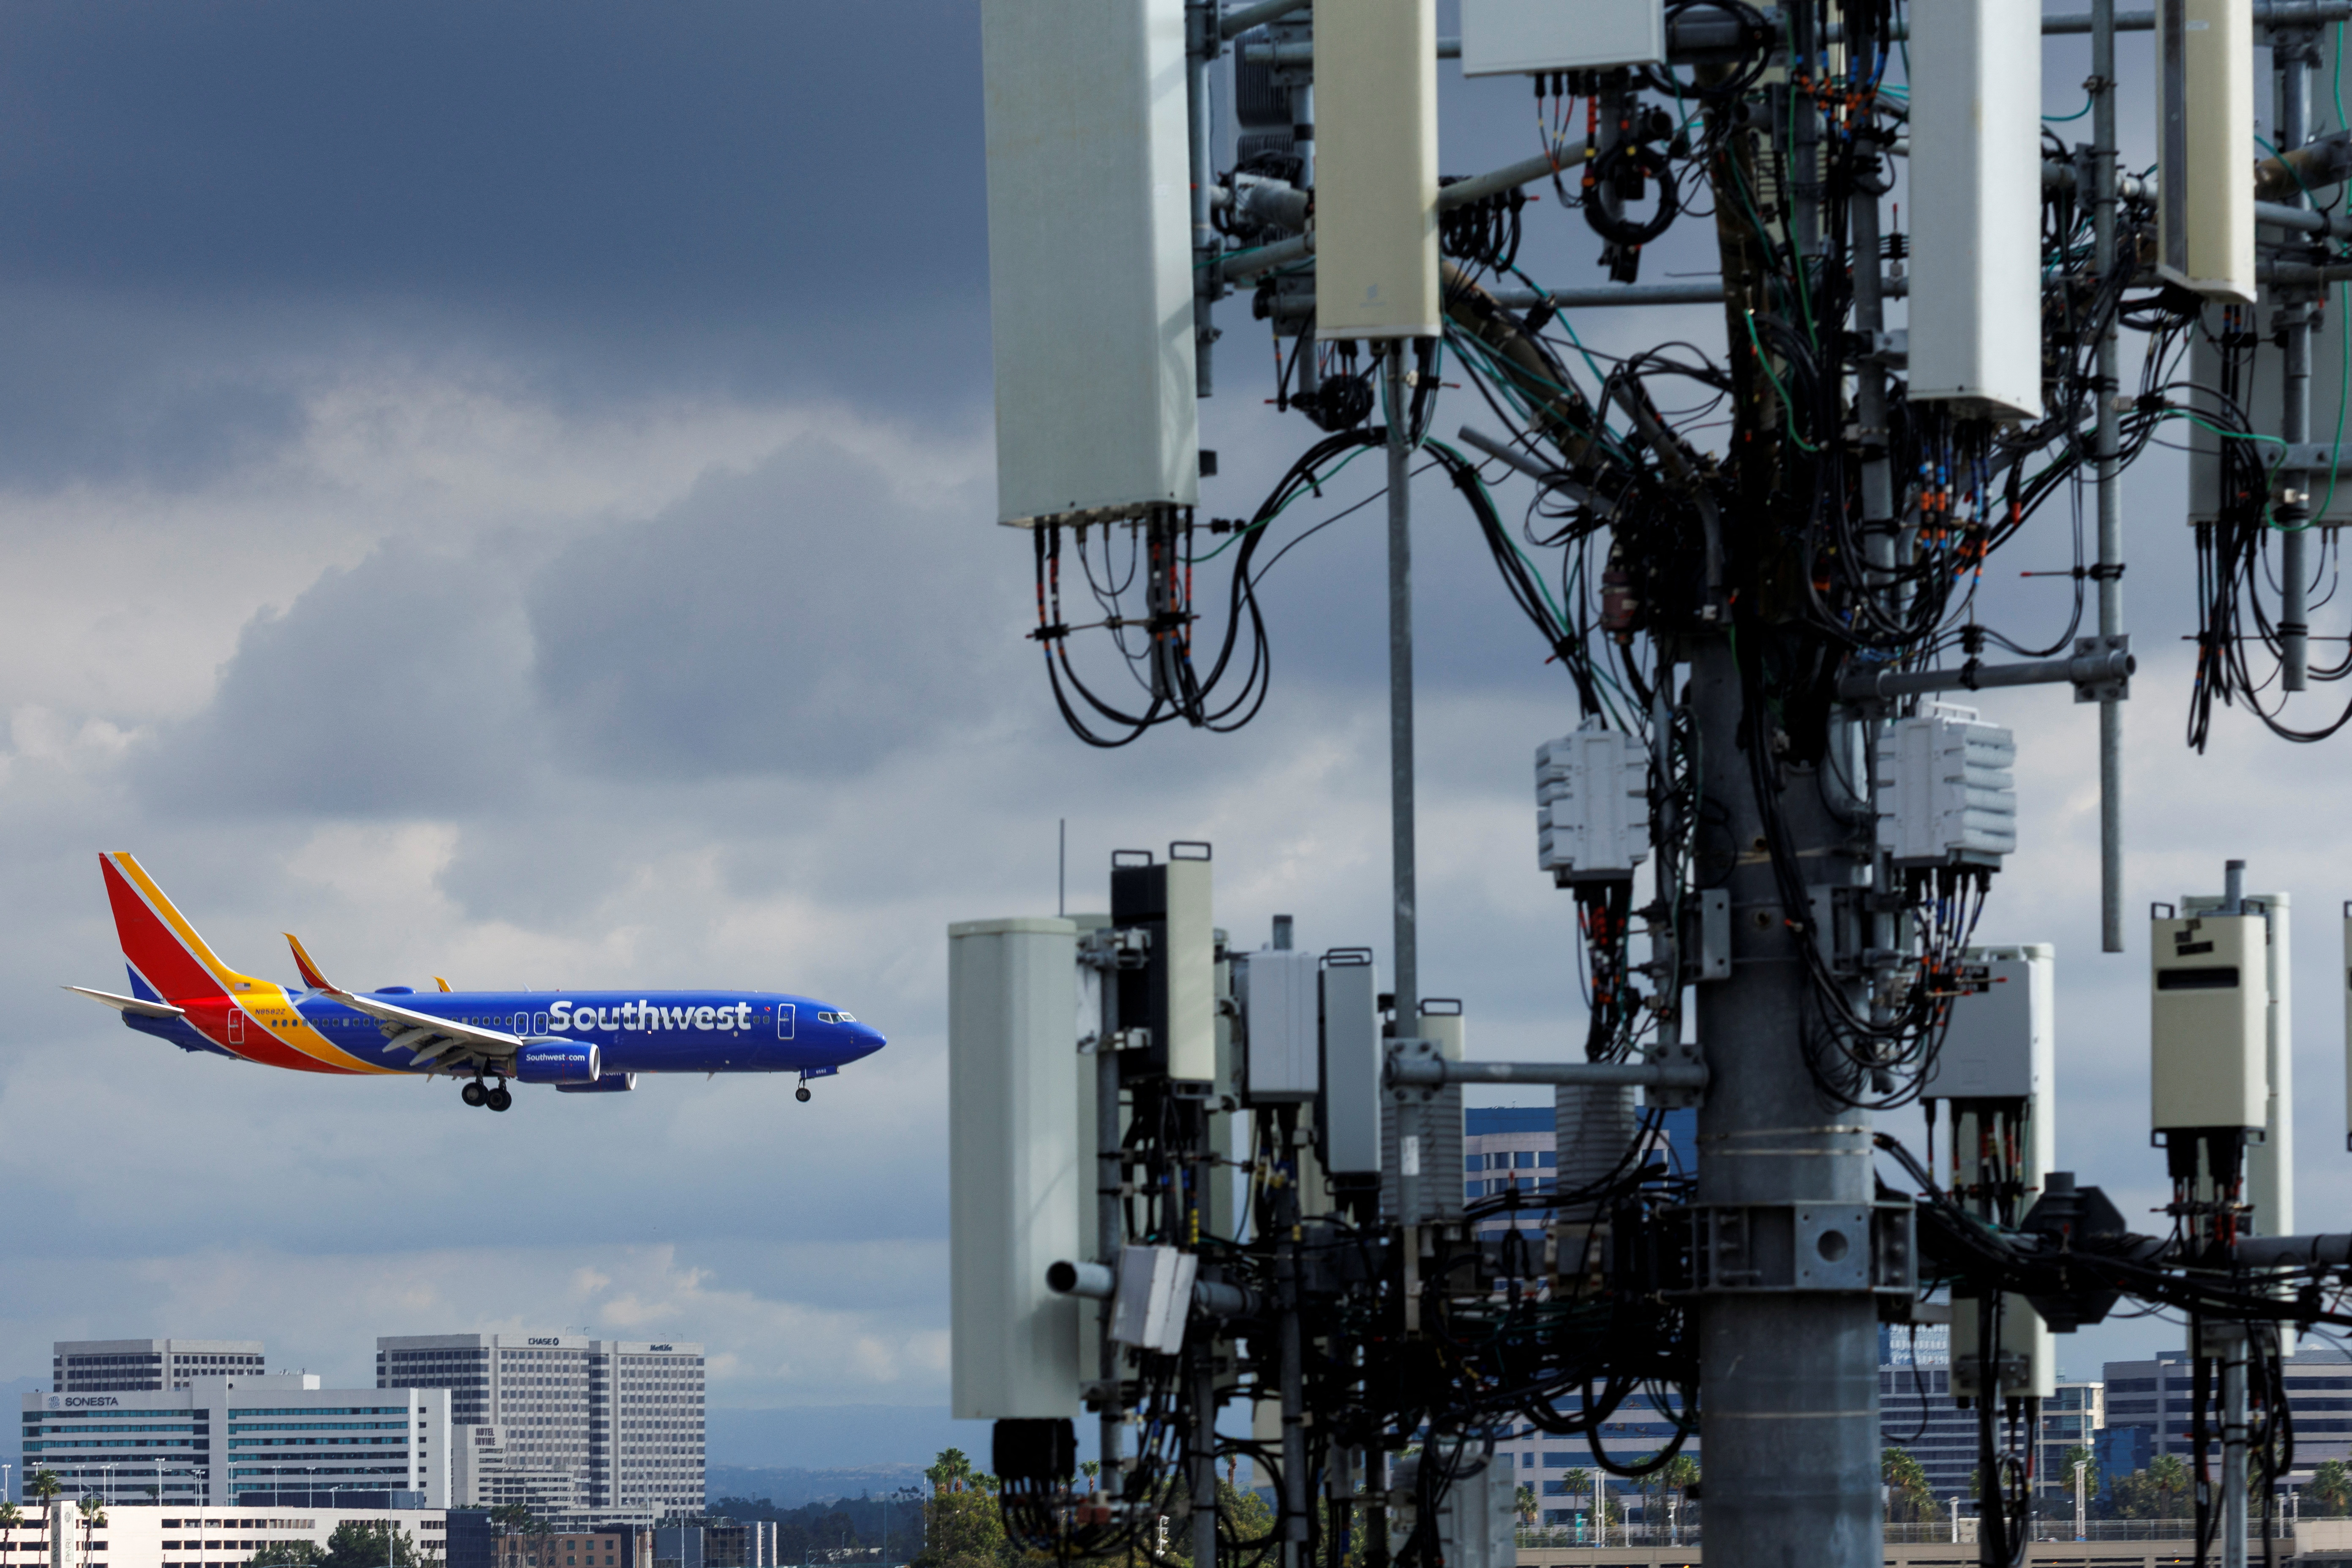 Commercial aircraft lands past cell phone tower in California